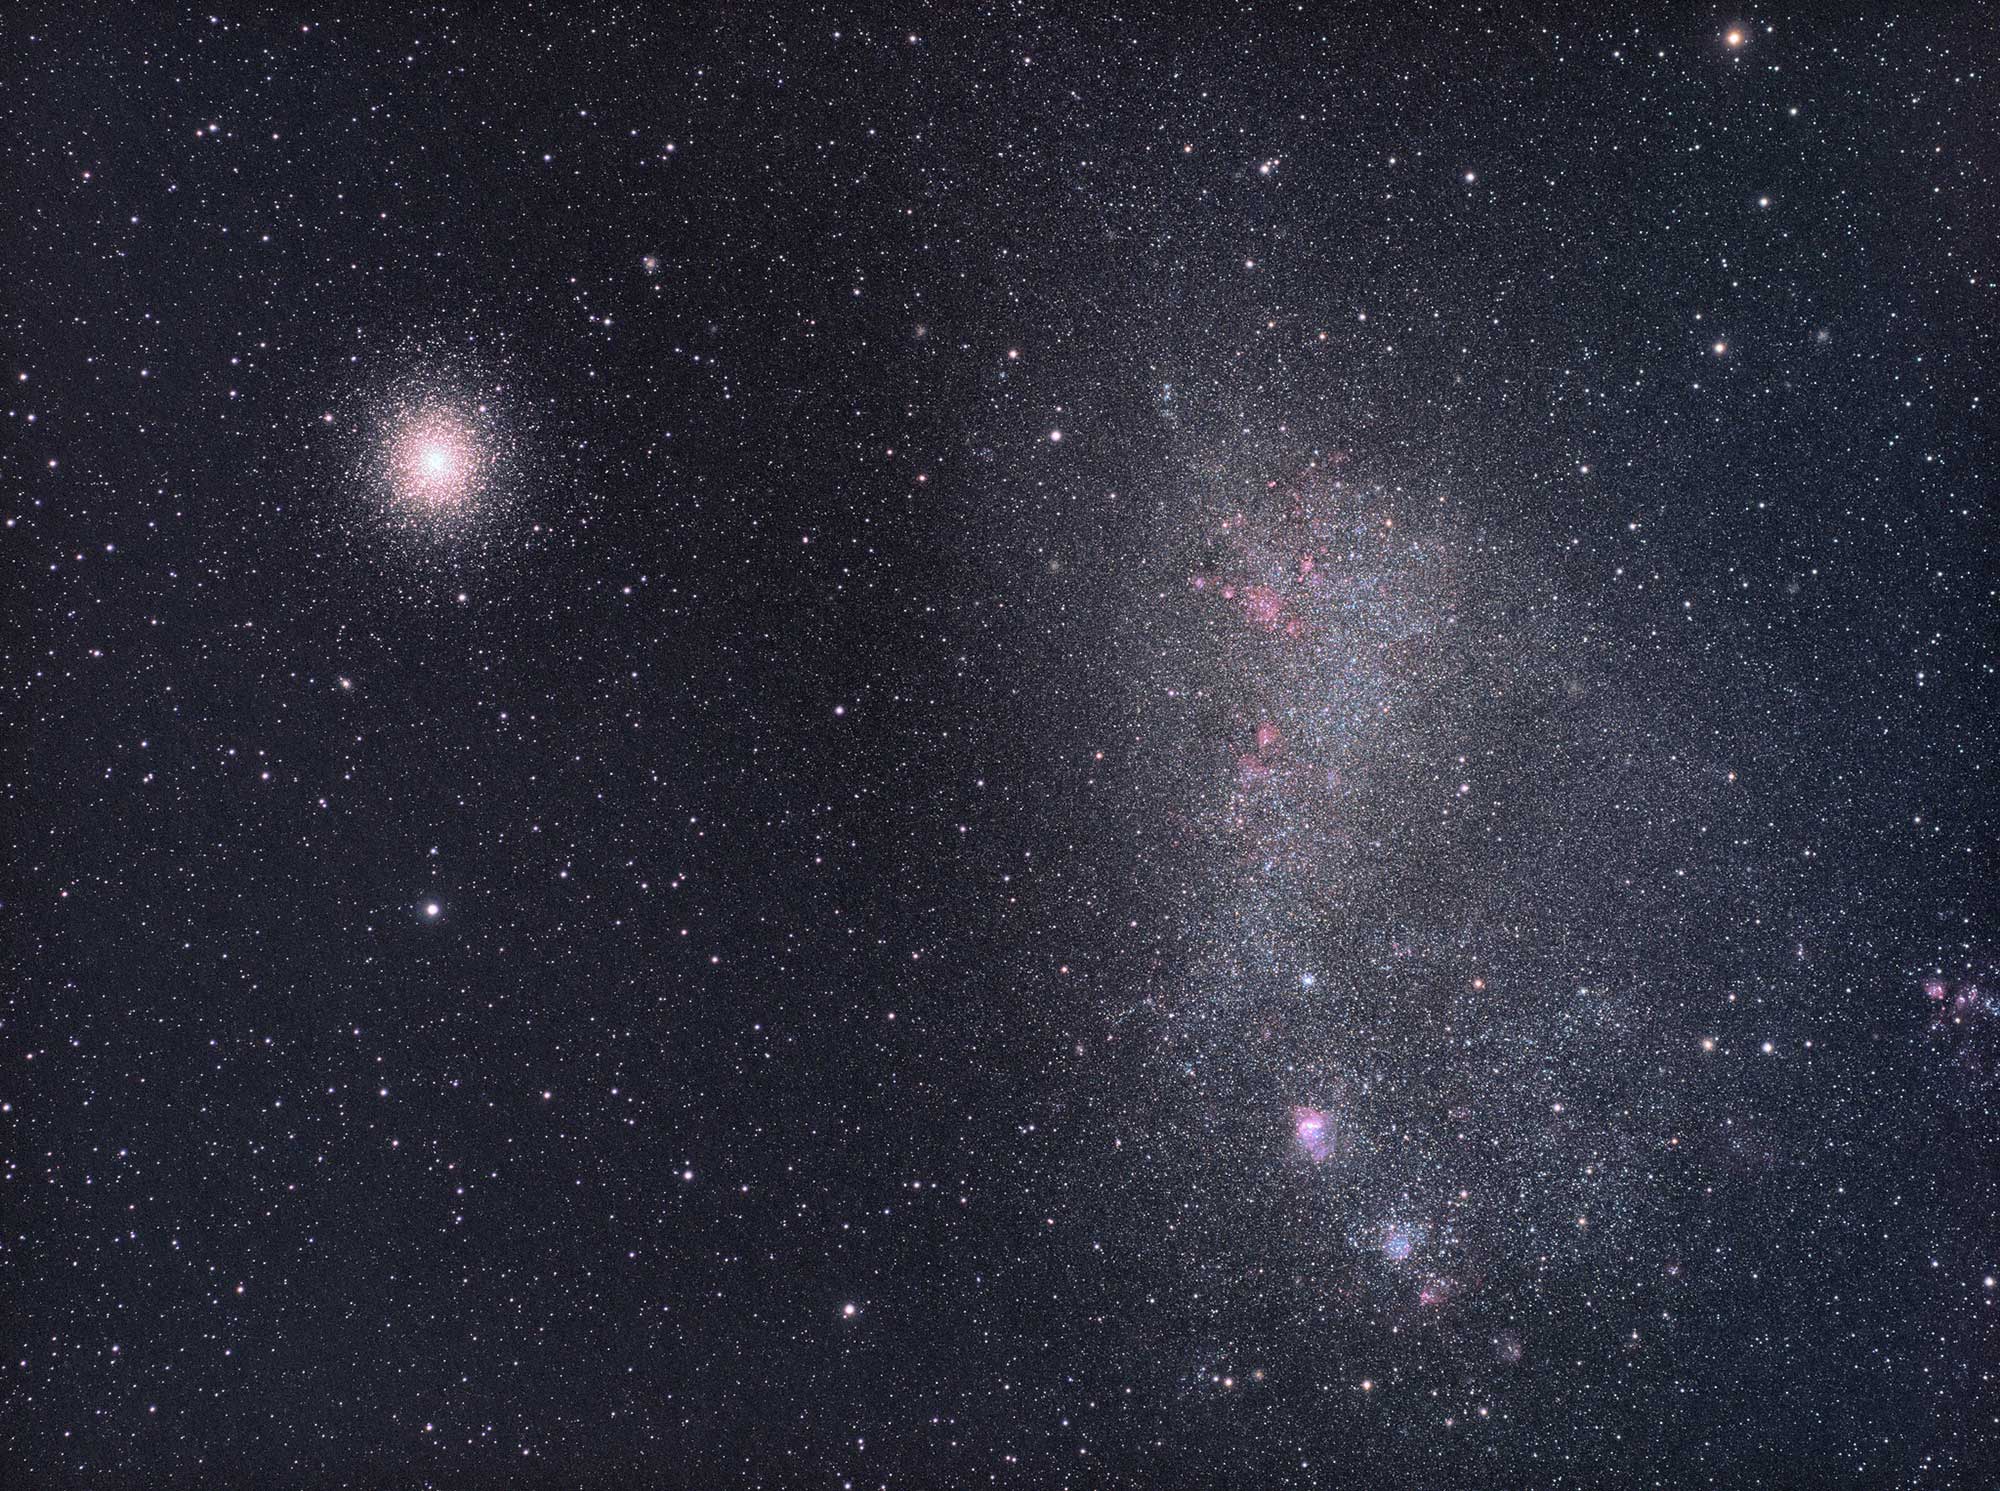 The Small Cloud of Magellan and Tucanae 47 captured with the Borg55FL using the Star Adventurer mount